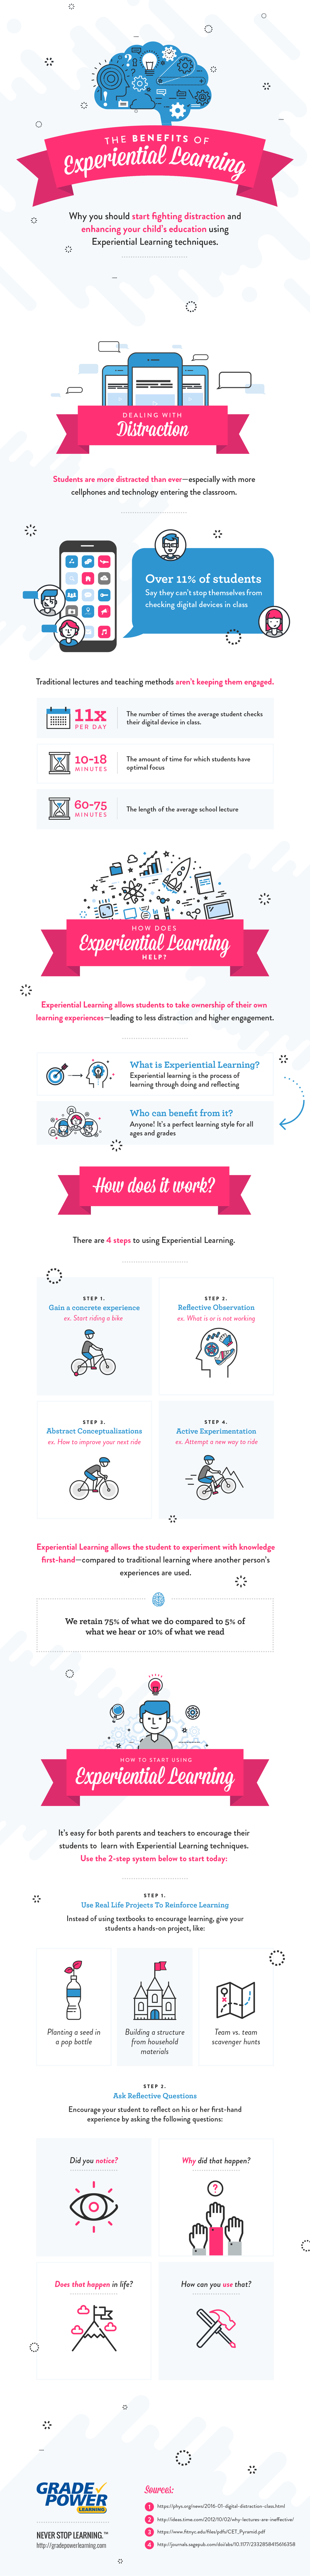 experiential learning infographic